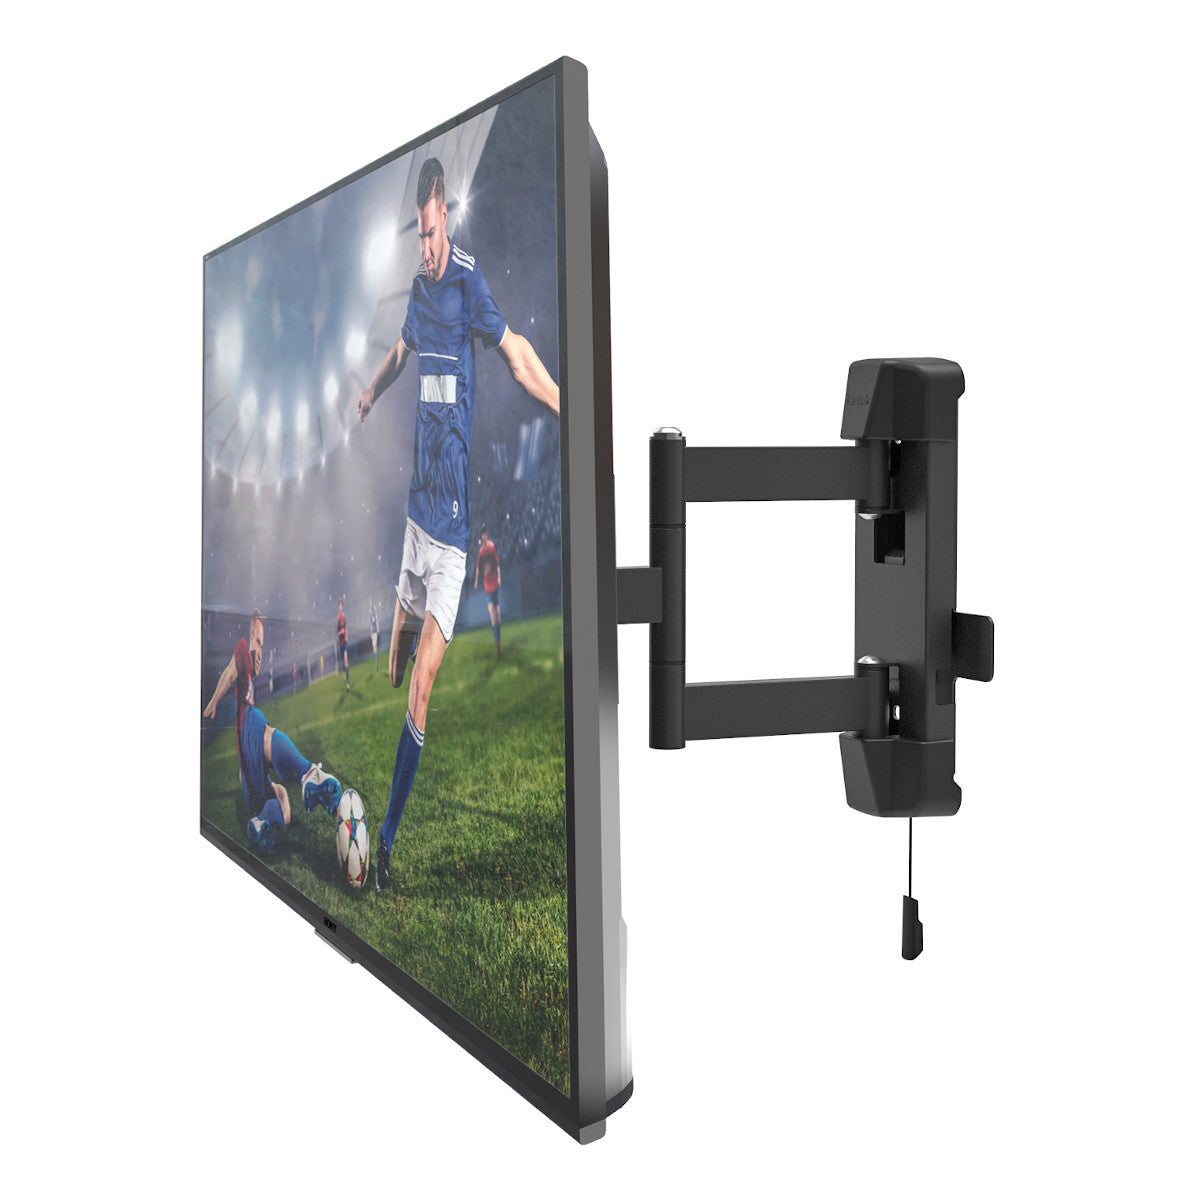 Kanto RV250G Full Motion Indoor/Outdoor RV and Boat Mount for 26" - 42" TV